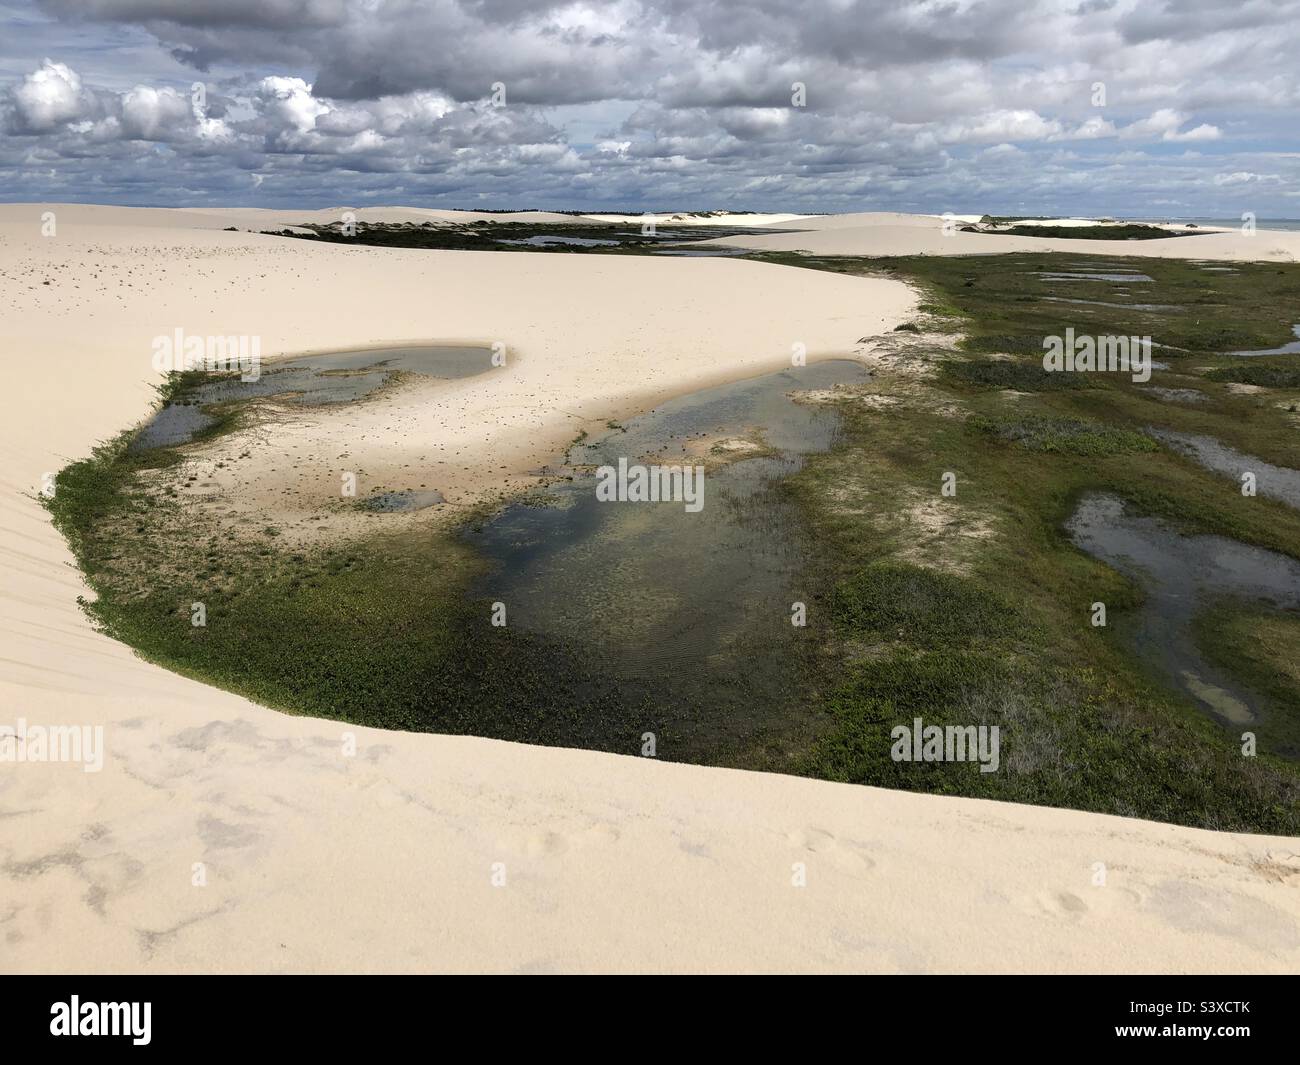 Dunes and lagoons in Brazil. Stock Photo